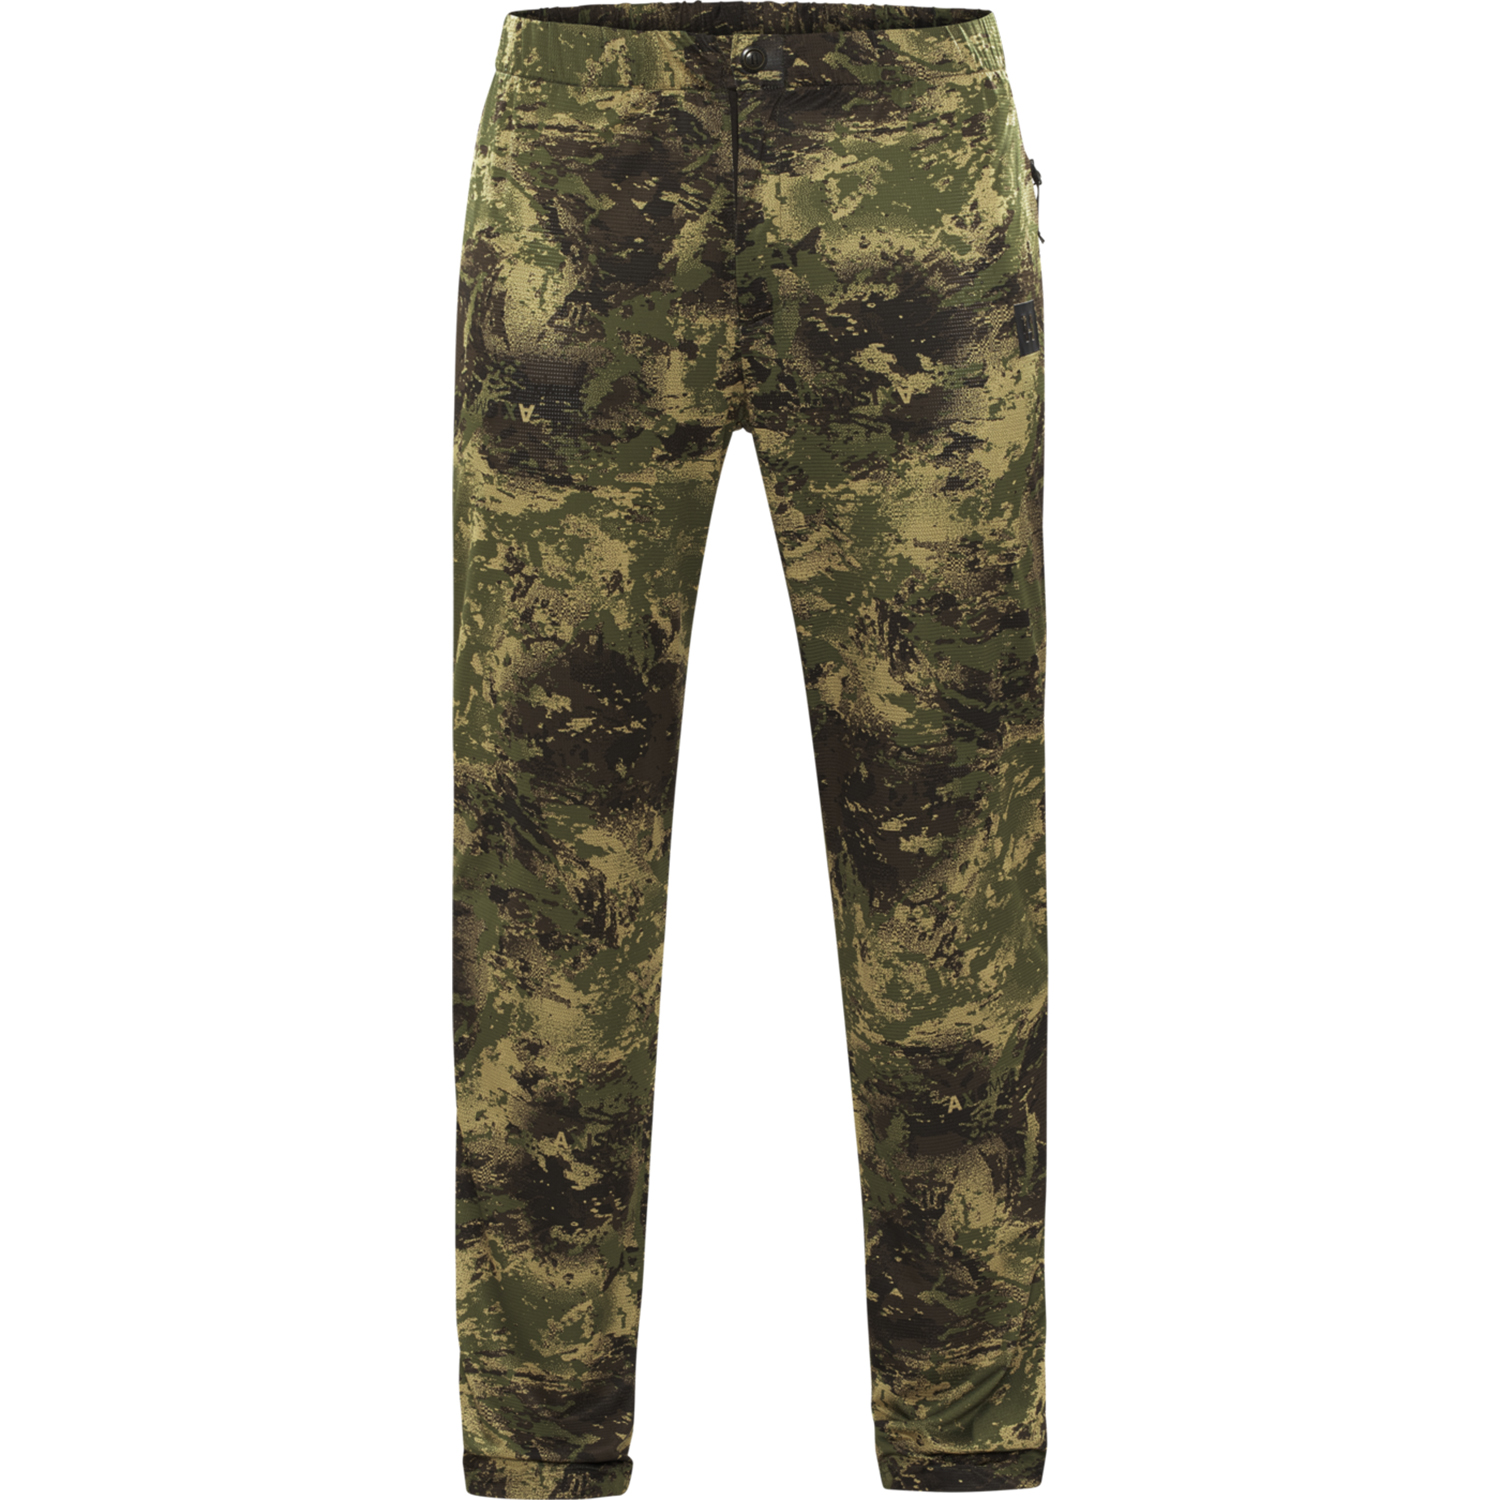 Härkila cover trousers deer stalker (AXIS MSP) - Camouflage Trousers